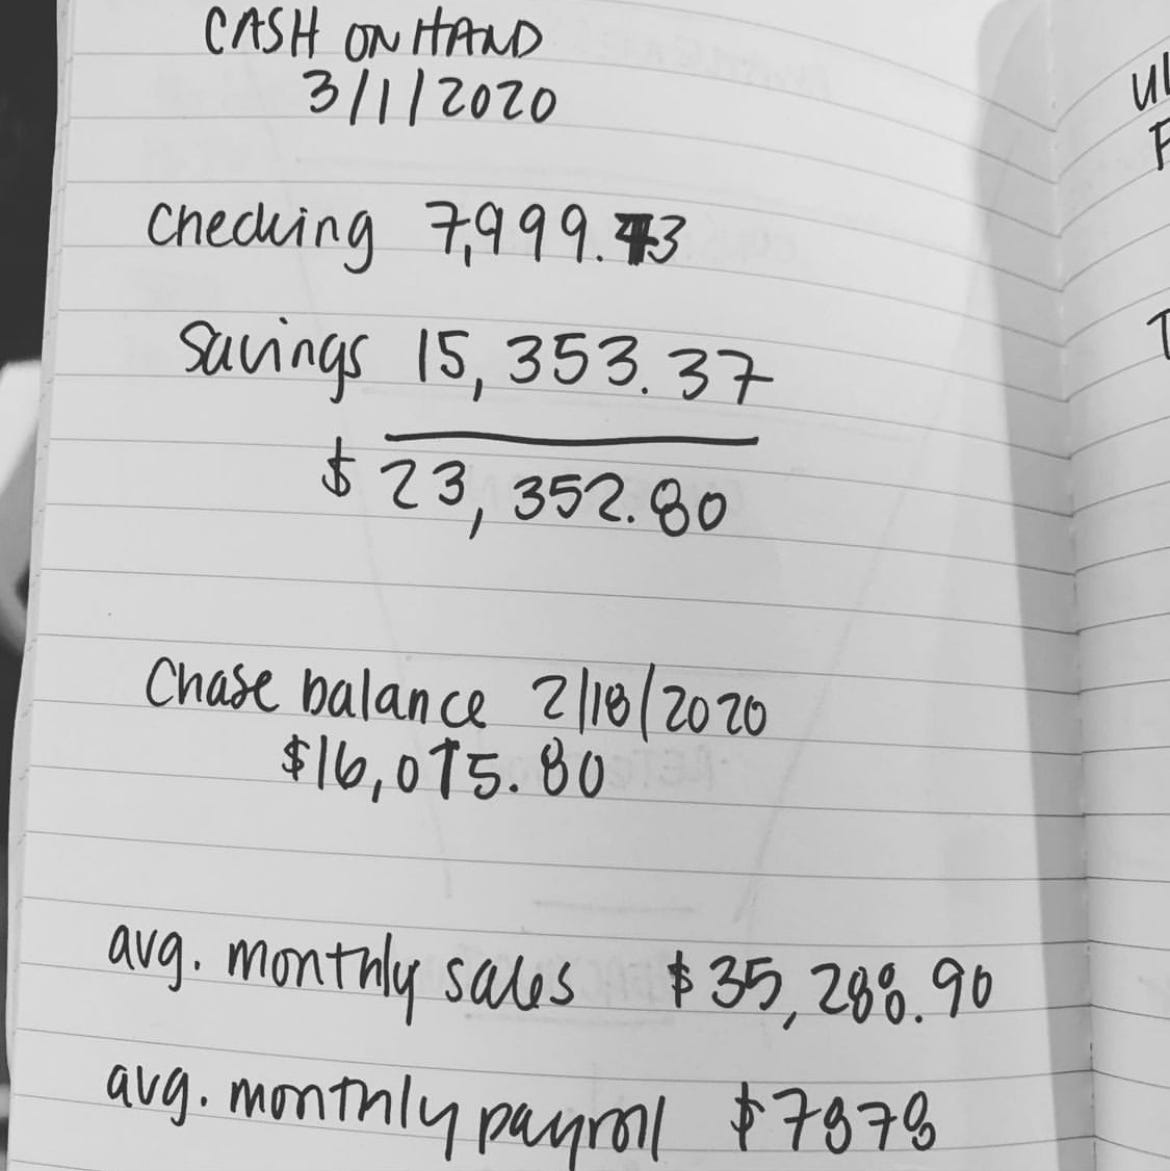 handwritten notes on lined paper with bank account numbers